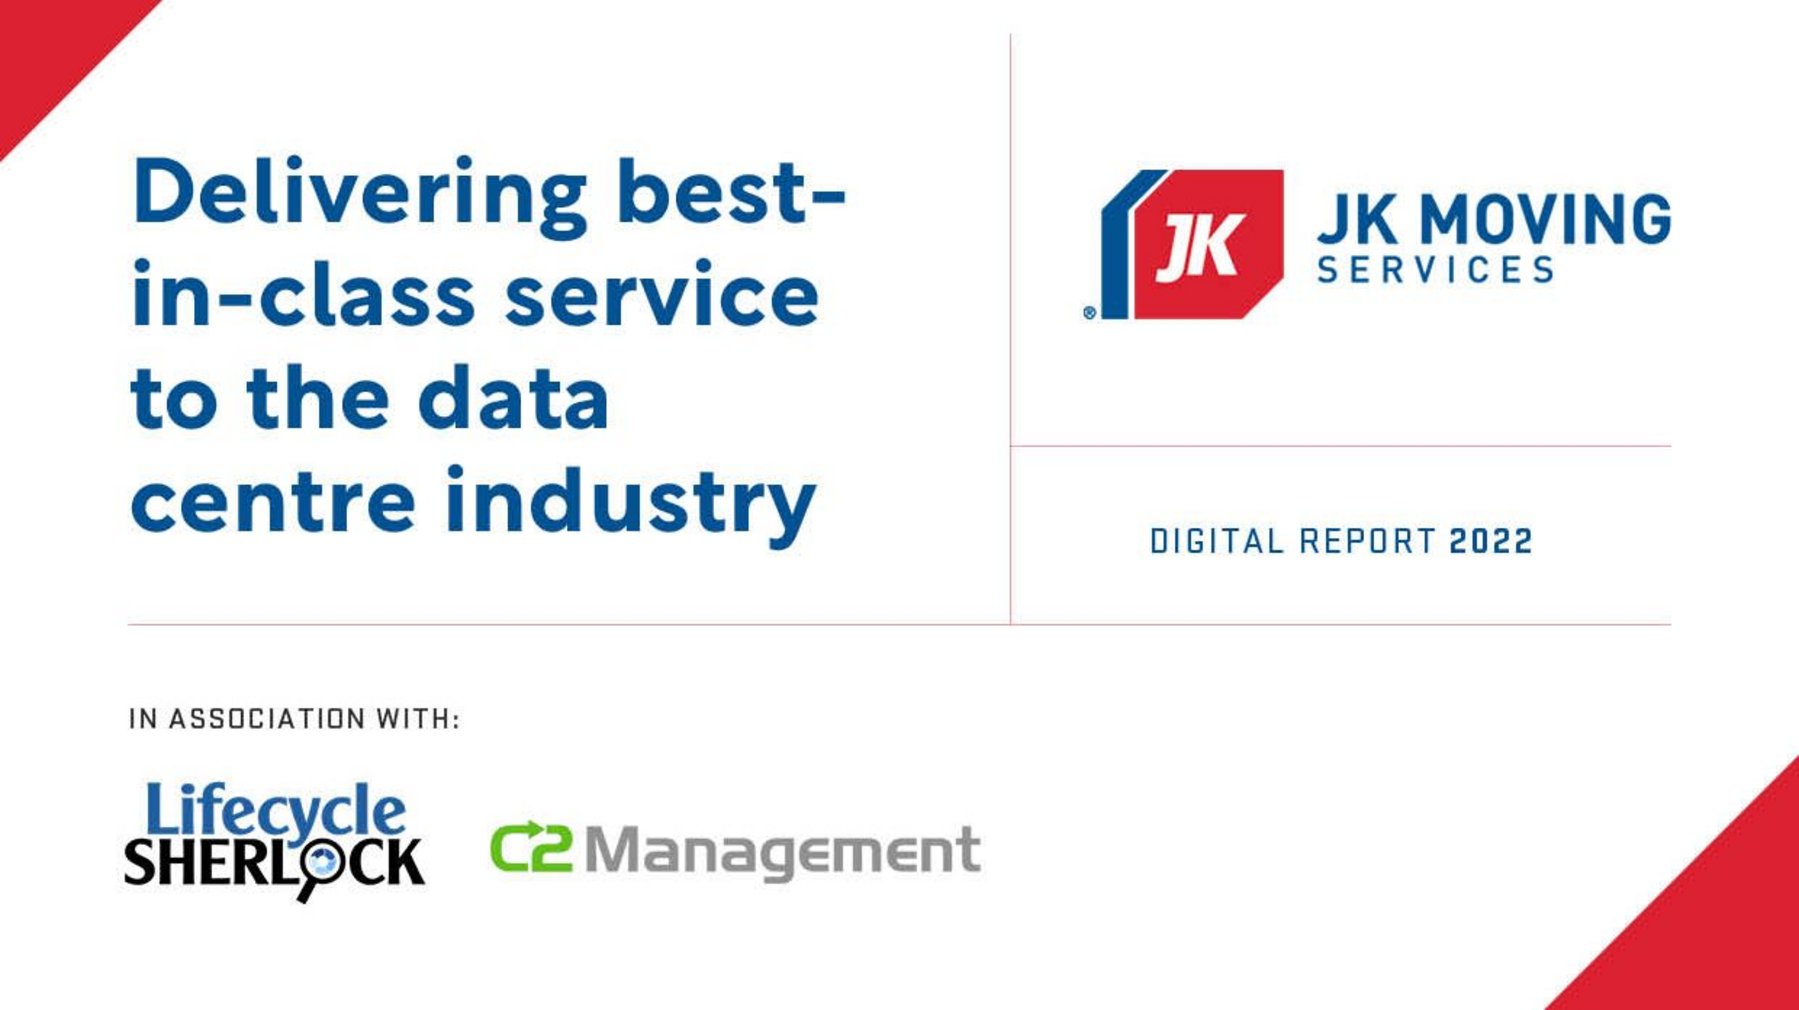 Delivering best-in-class service to the data centre industry